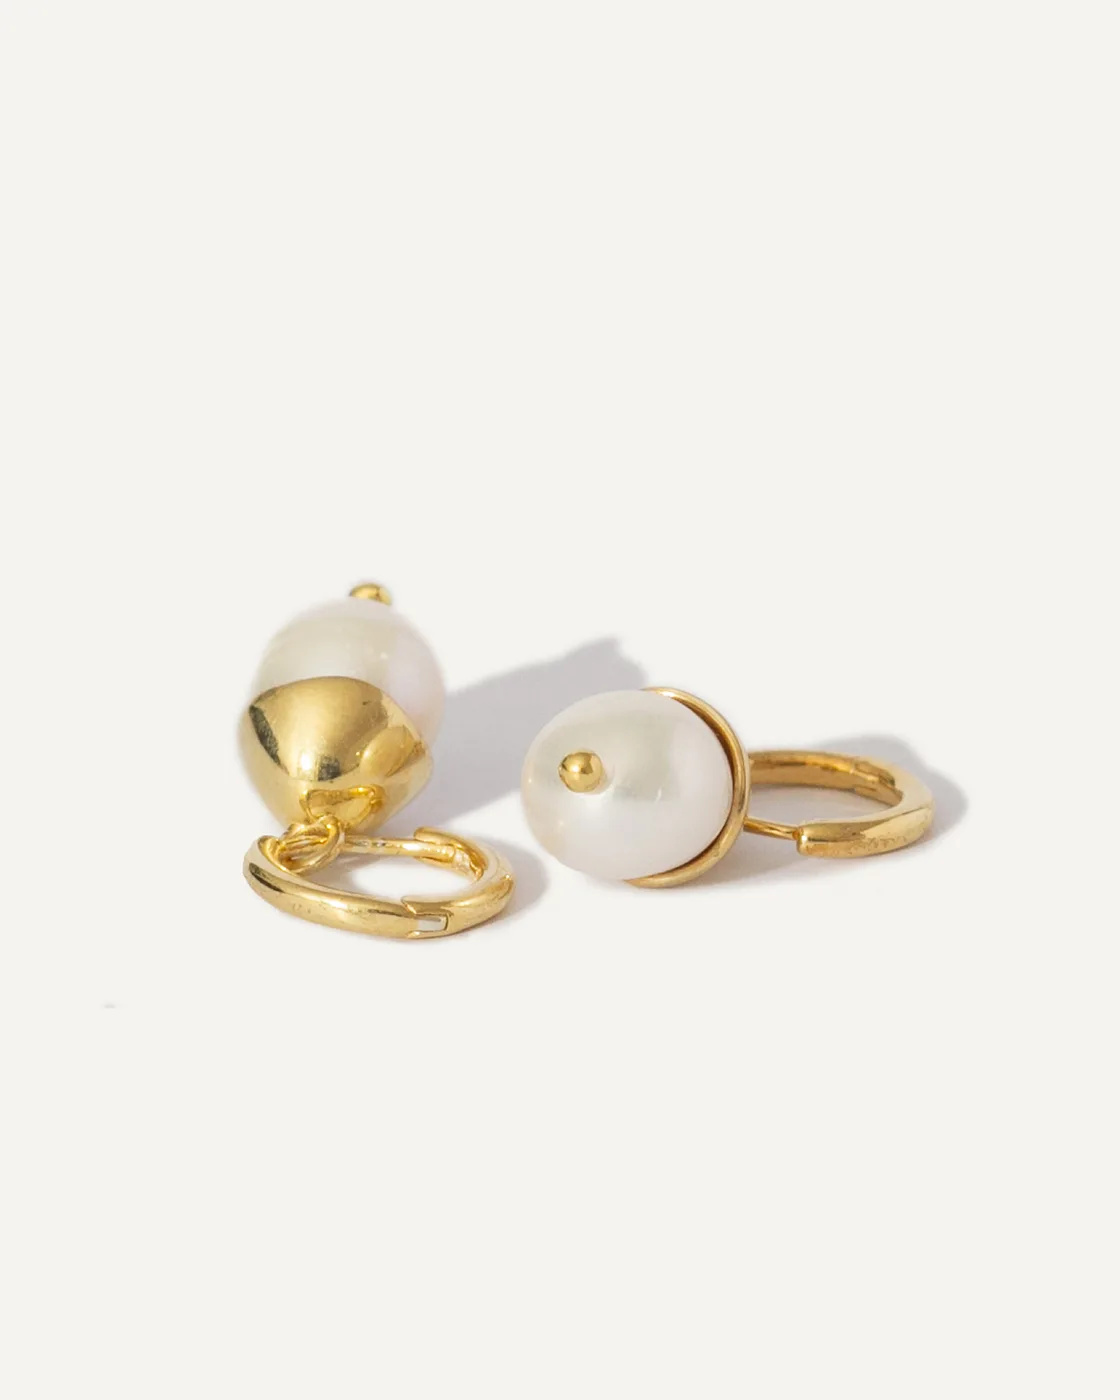 Perla Gold-Plated Sterling Silver Hoop Earrings with an Irregular Pearl